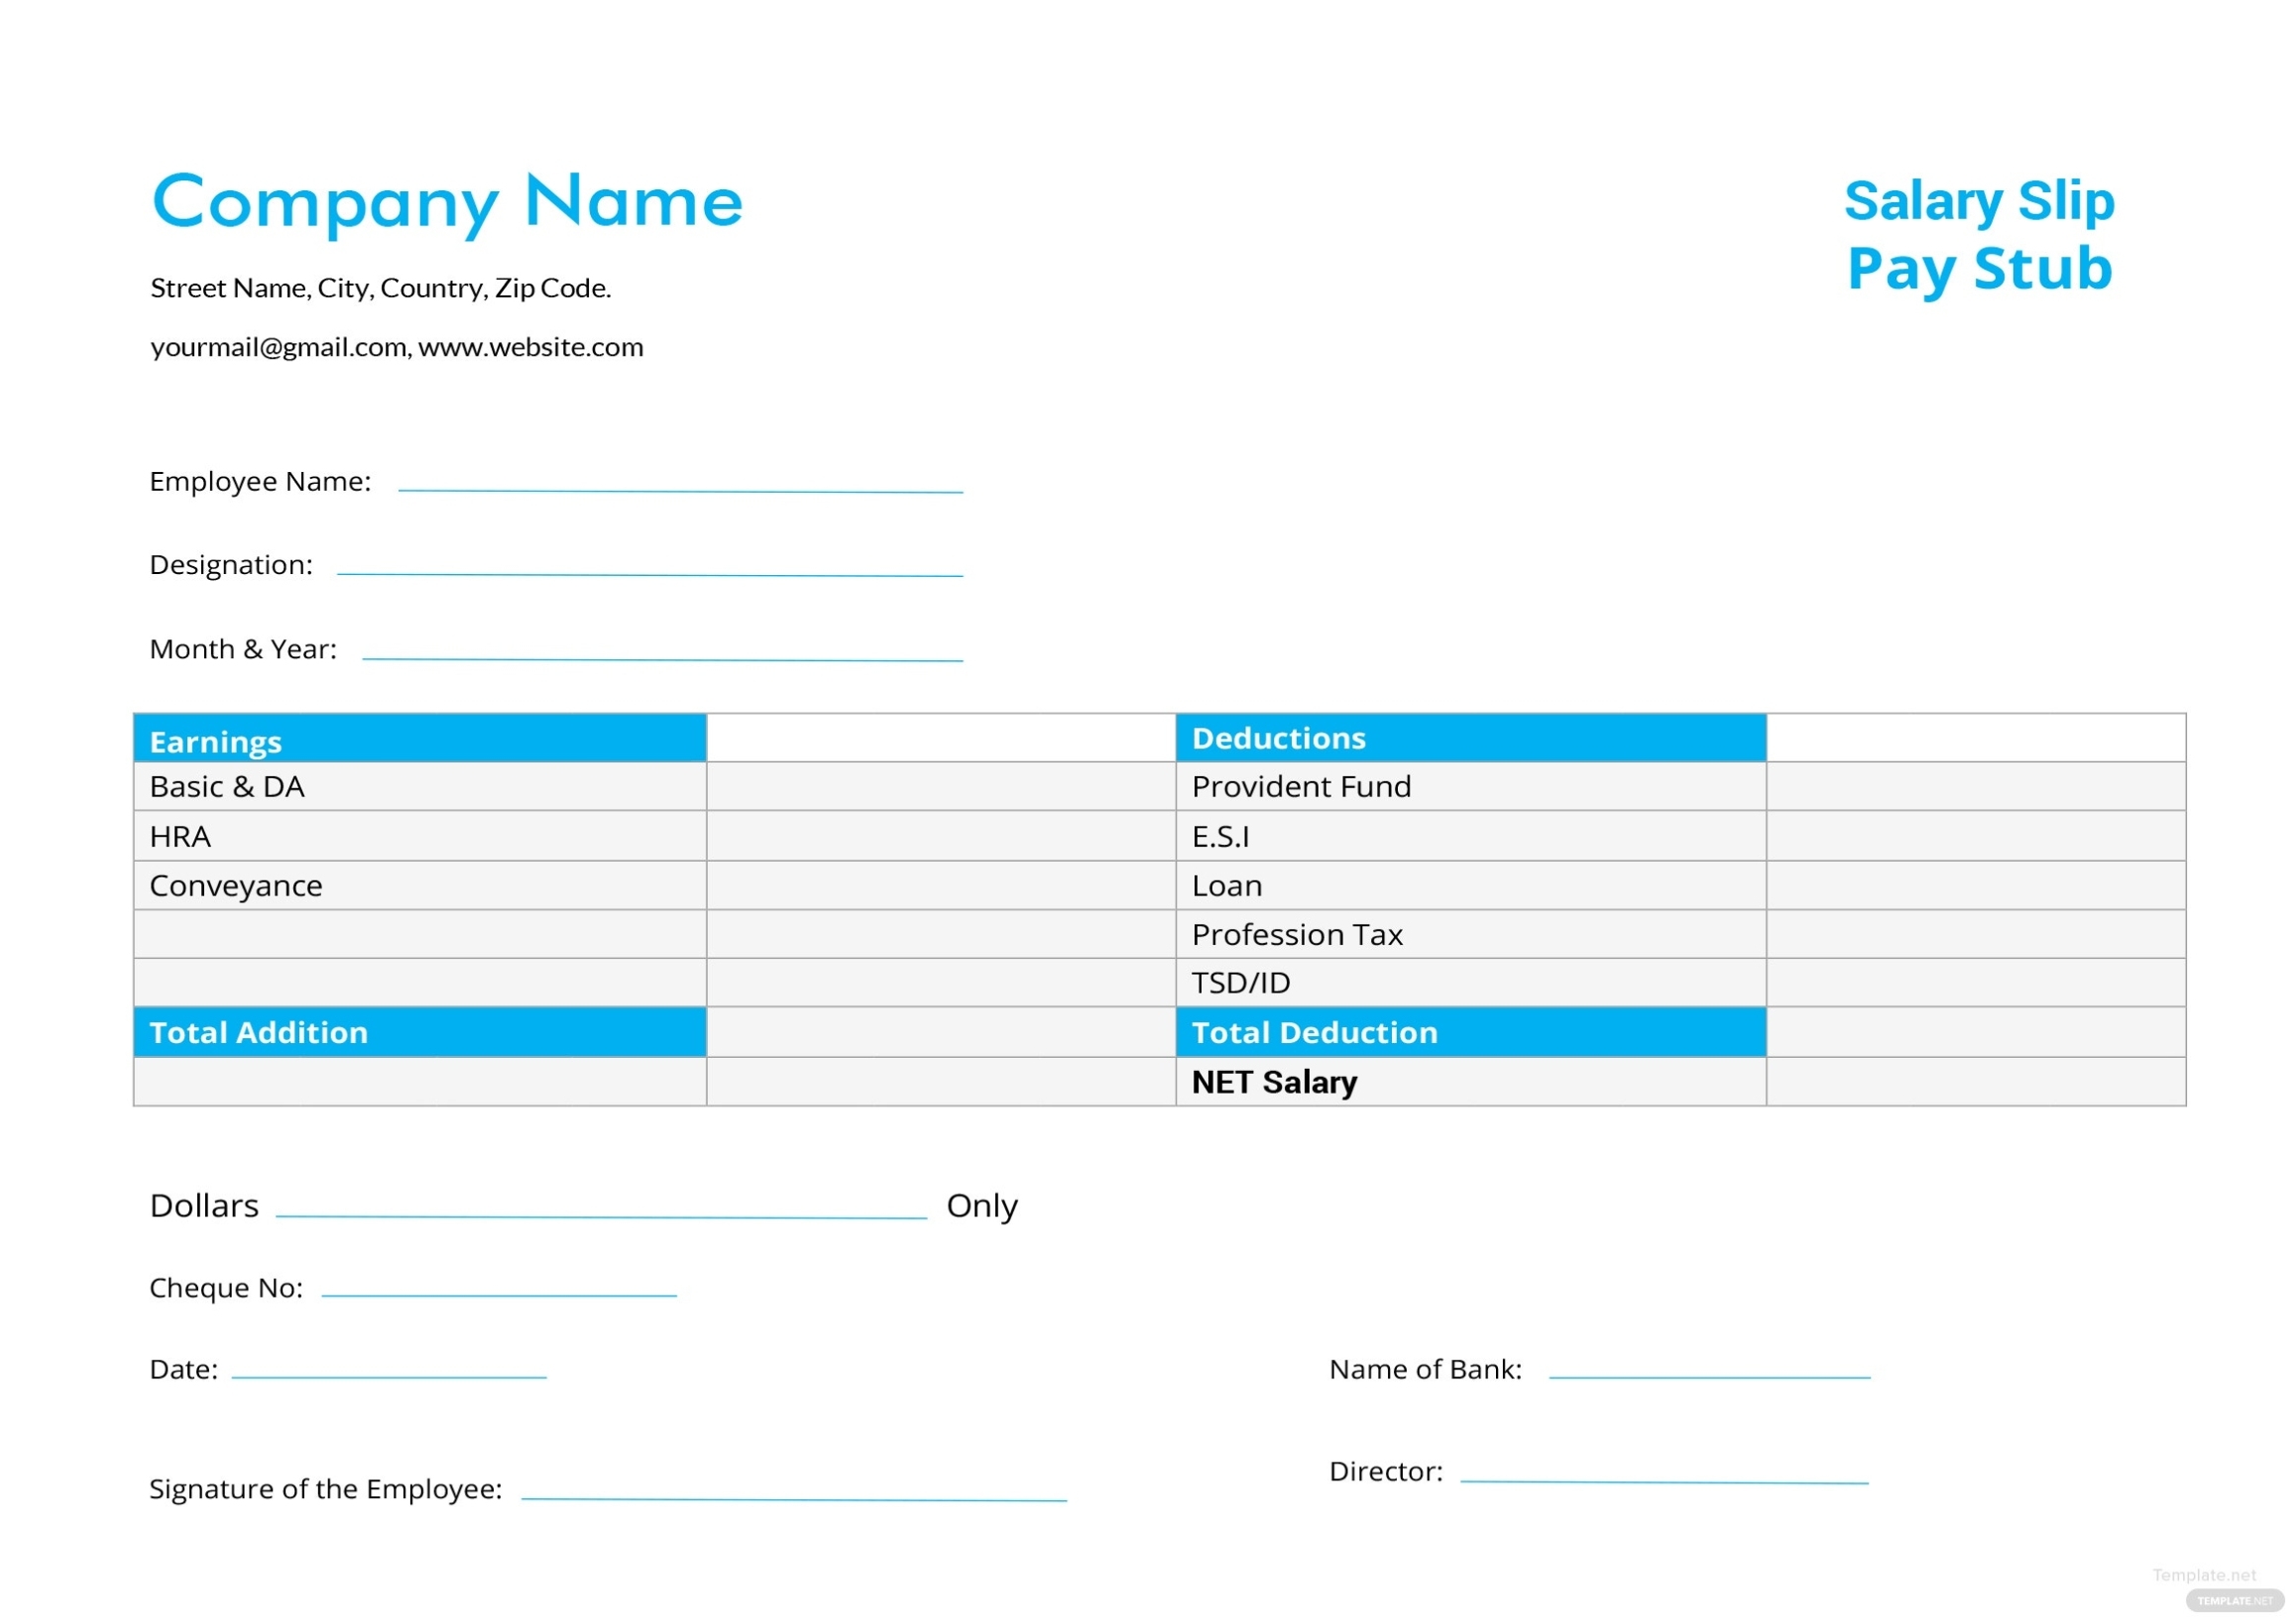 Corporate Business Pay Stub Template In Microsoft Word, Excel | Template Throughout Pay Stub Template Word Document